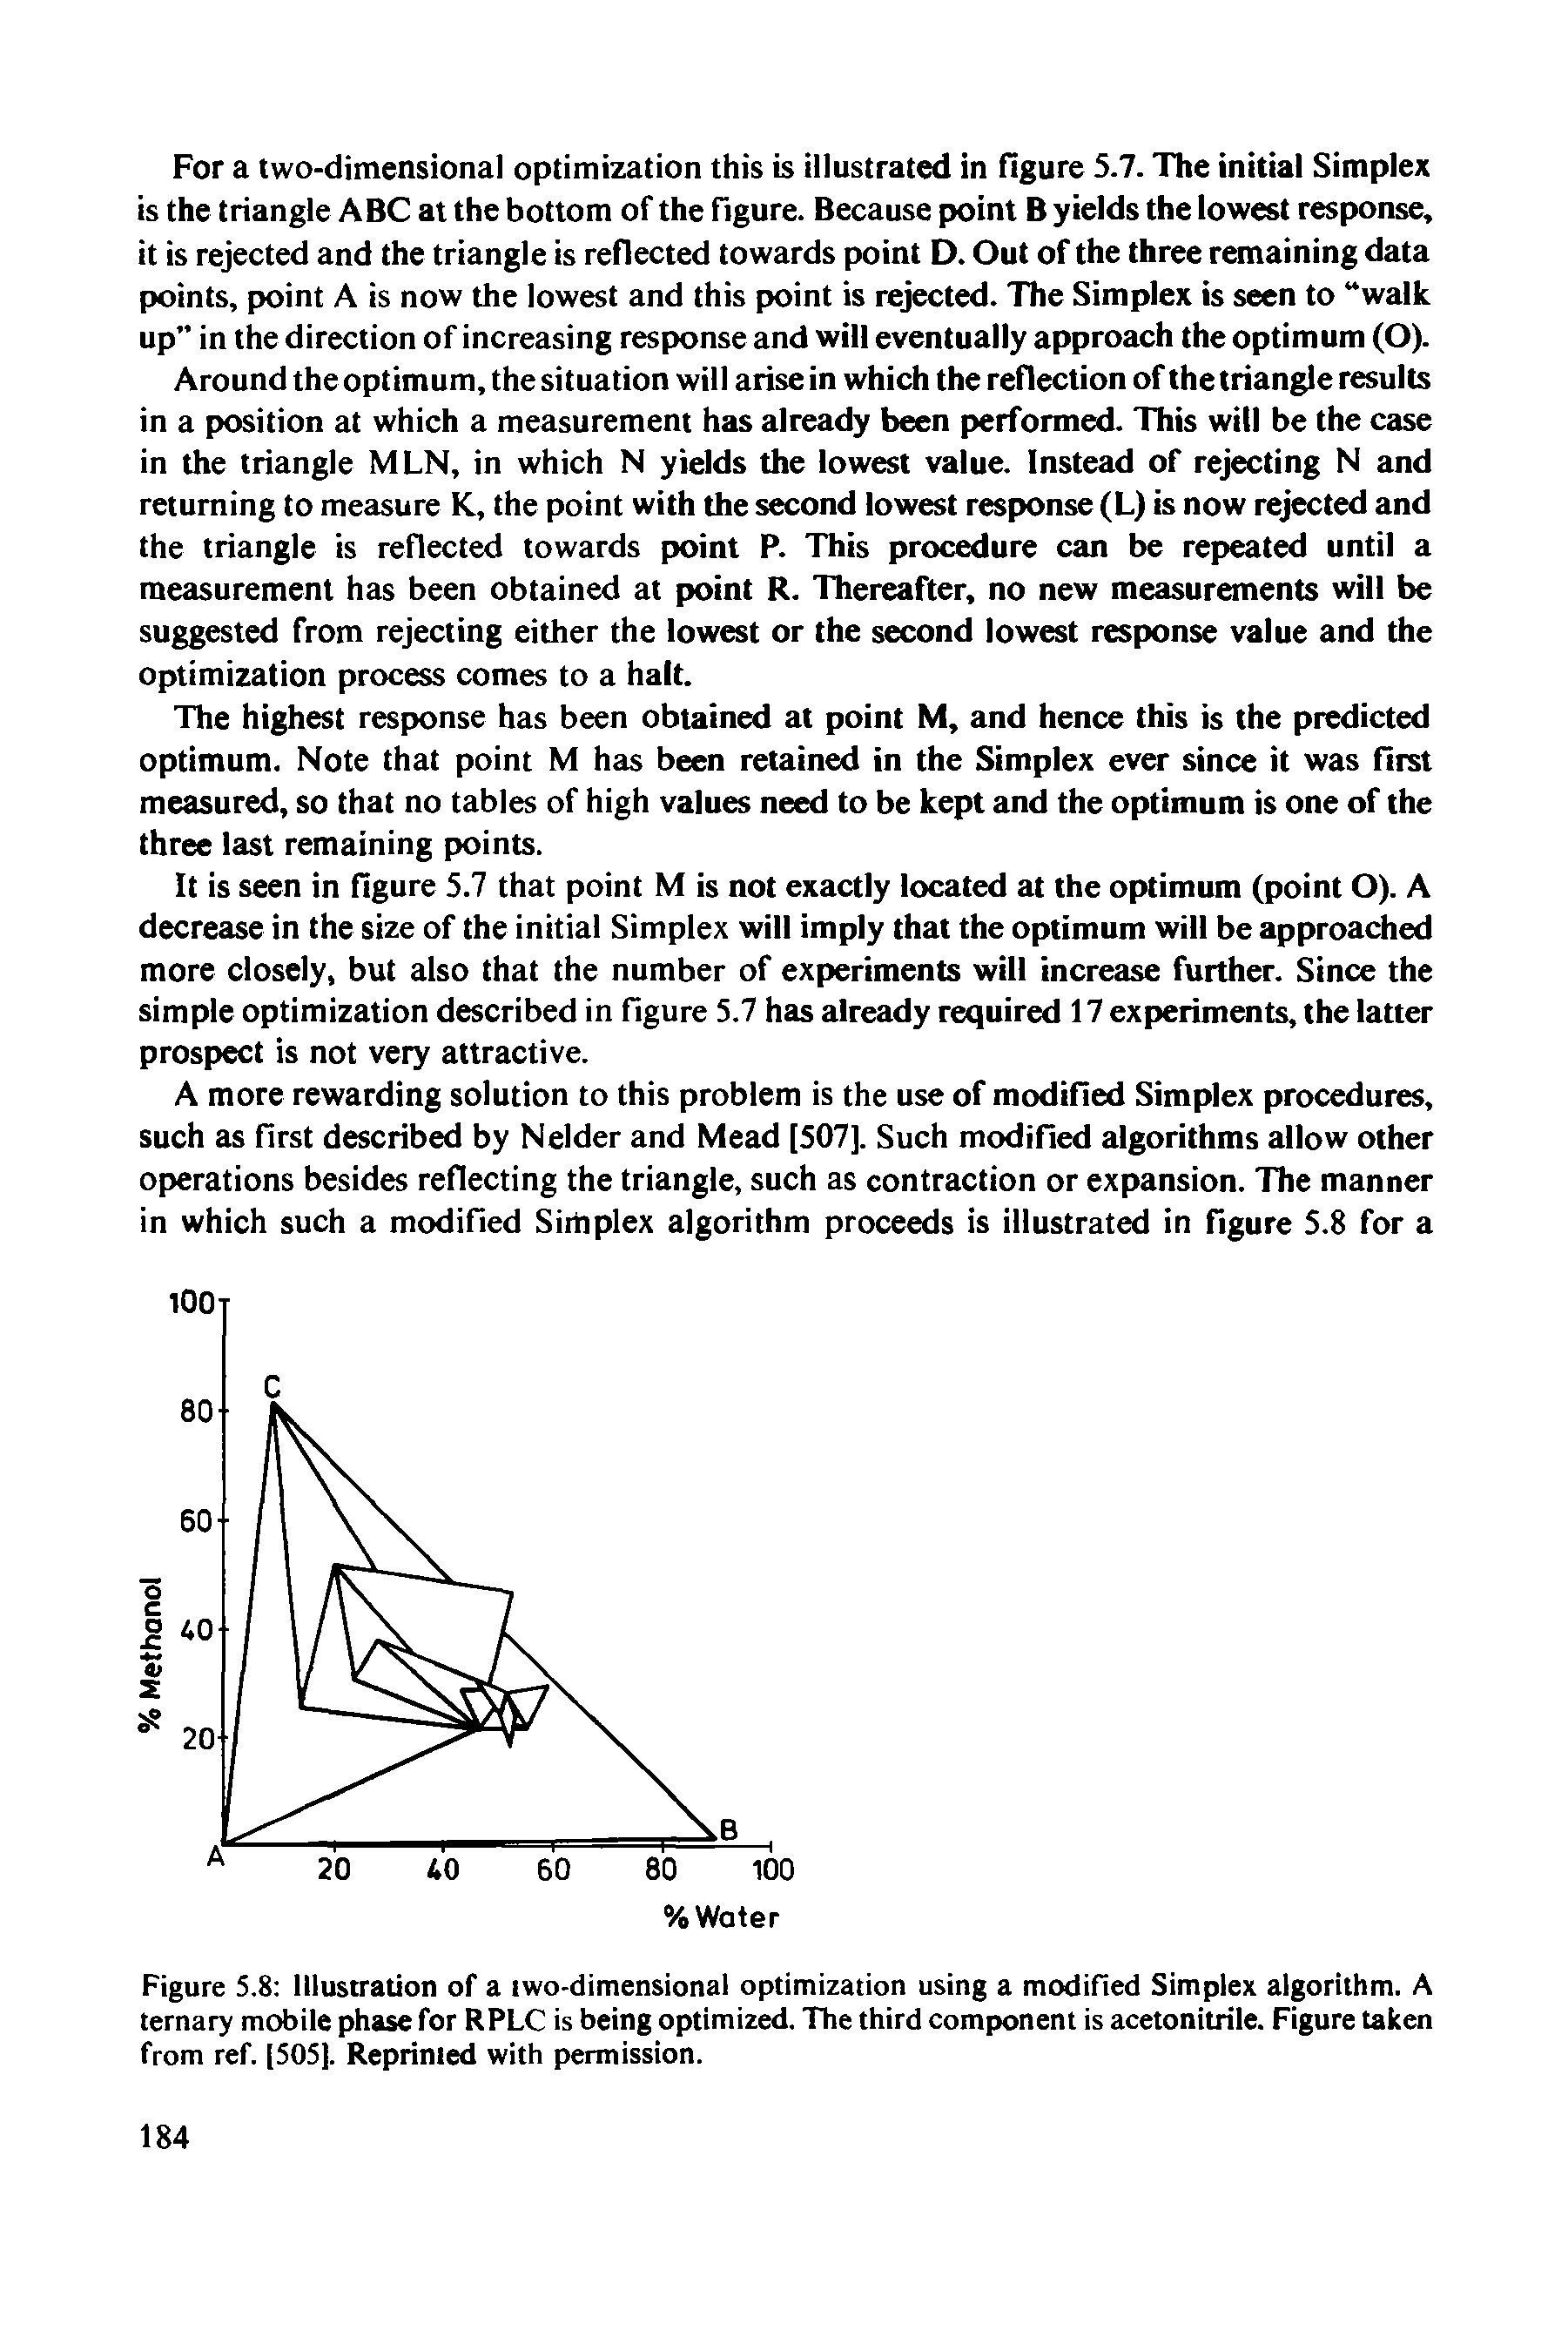 Figure 5.8 Illustration of a two-dimensional optimization using a modified Simplex algorithm. A ternary mobile phase for RPLC is being optimized. The third component is acetonitrile. Figure taken from ref. [505]. Reprinted with permission.